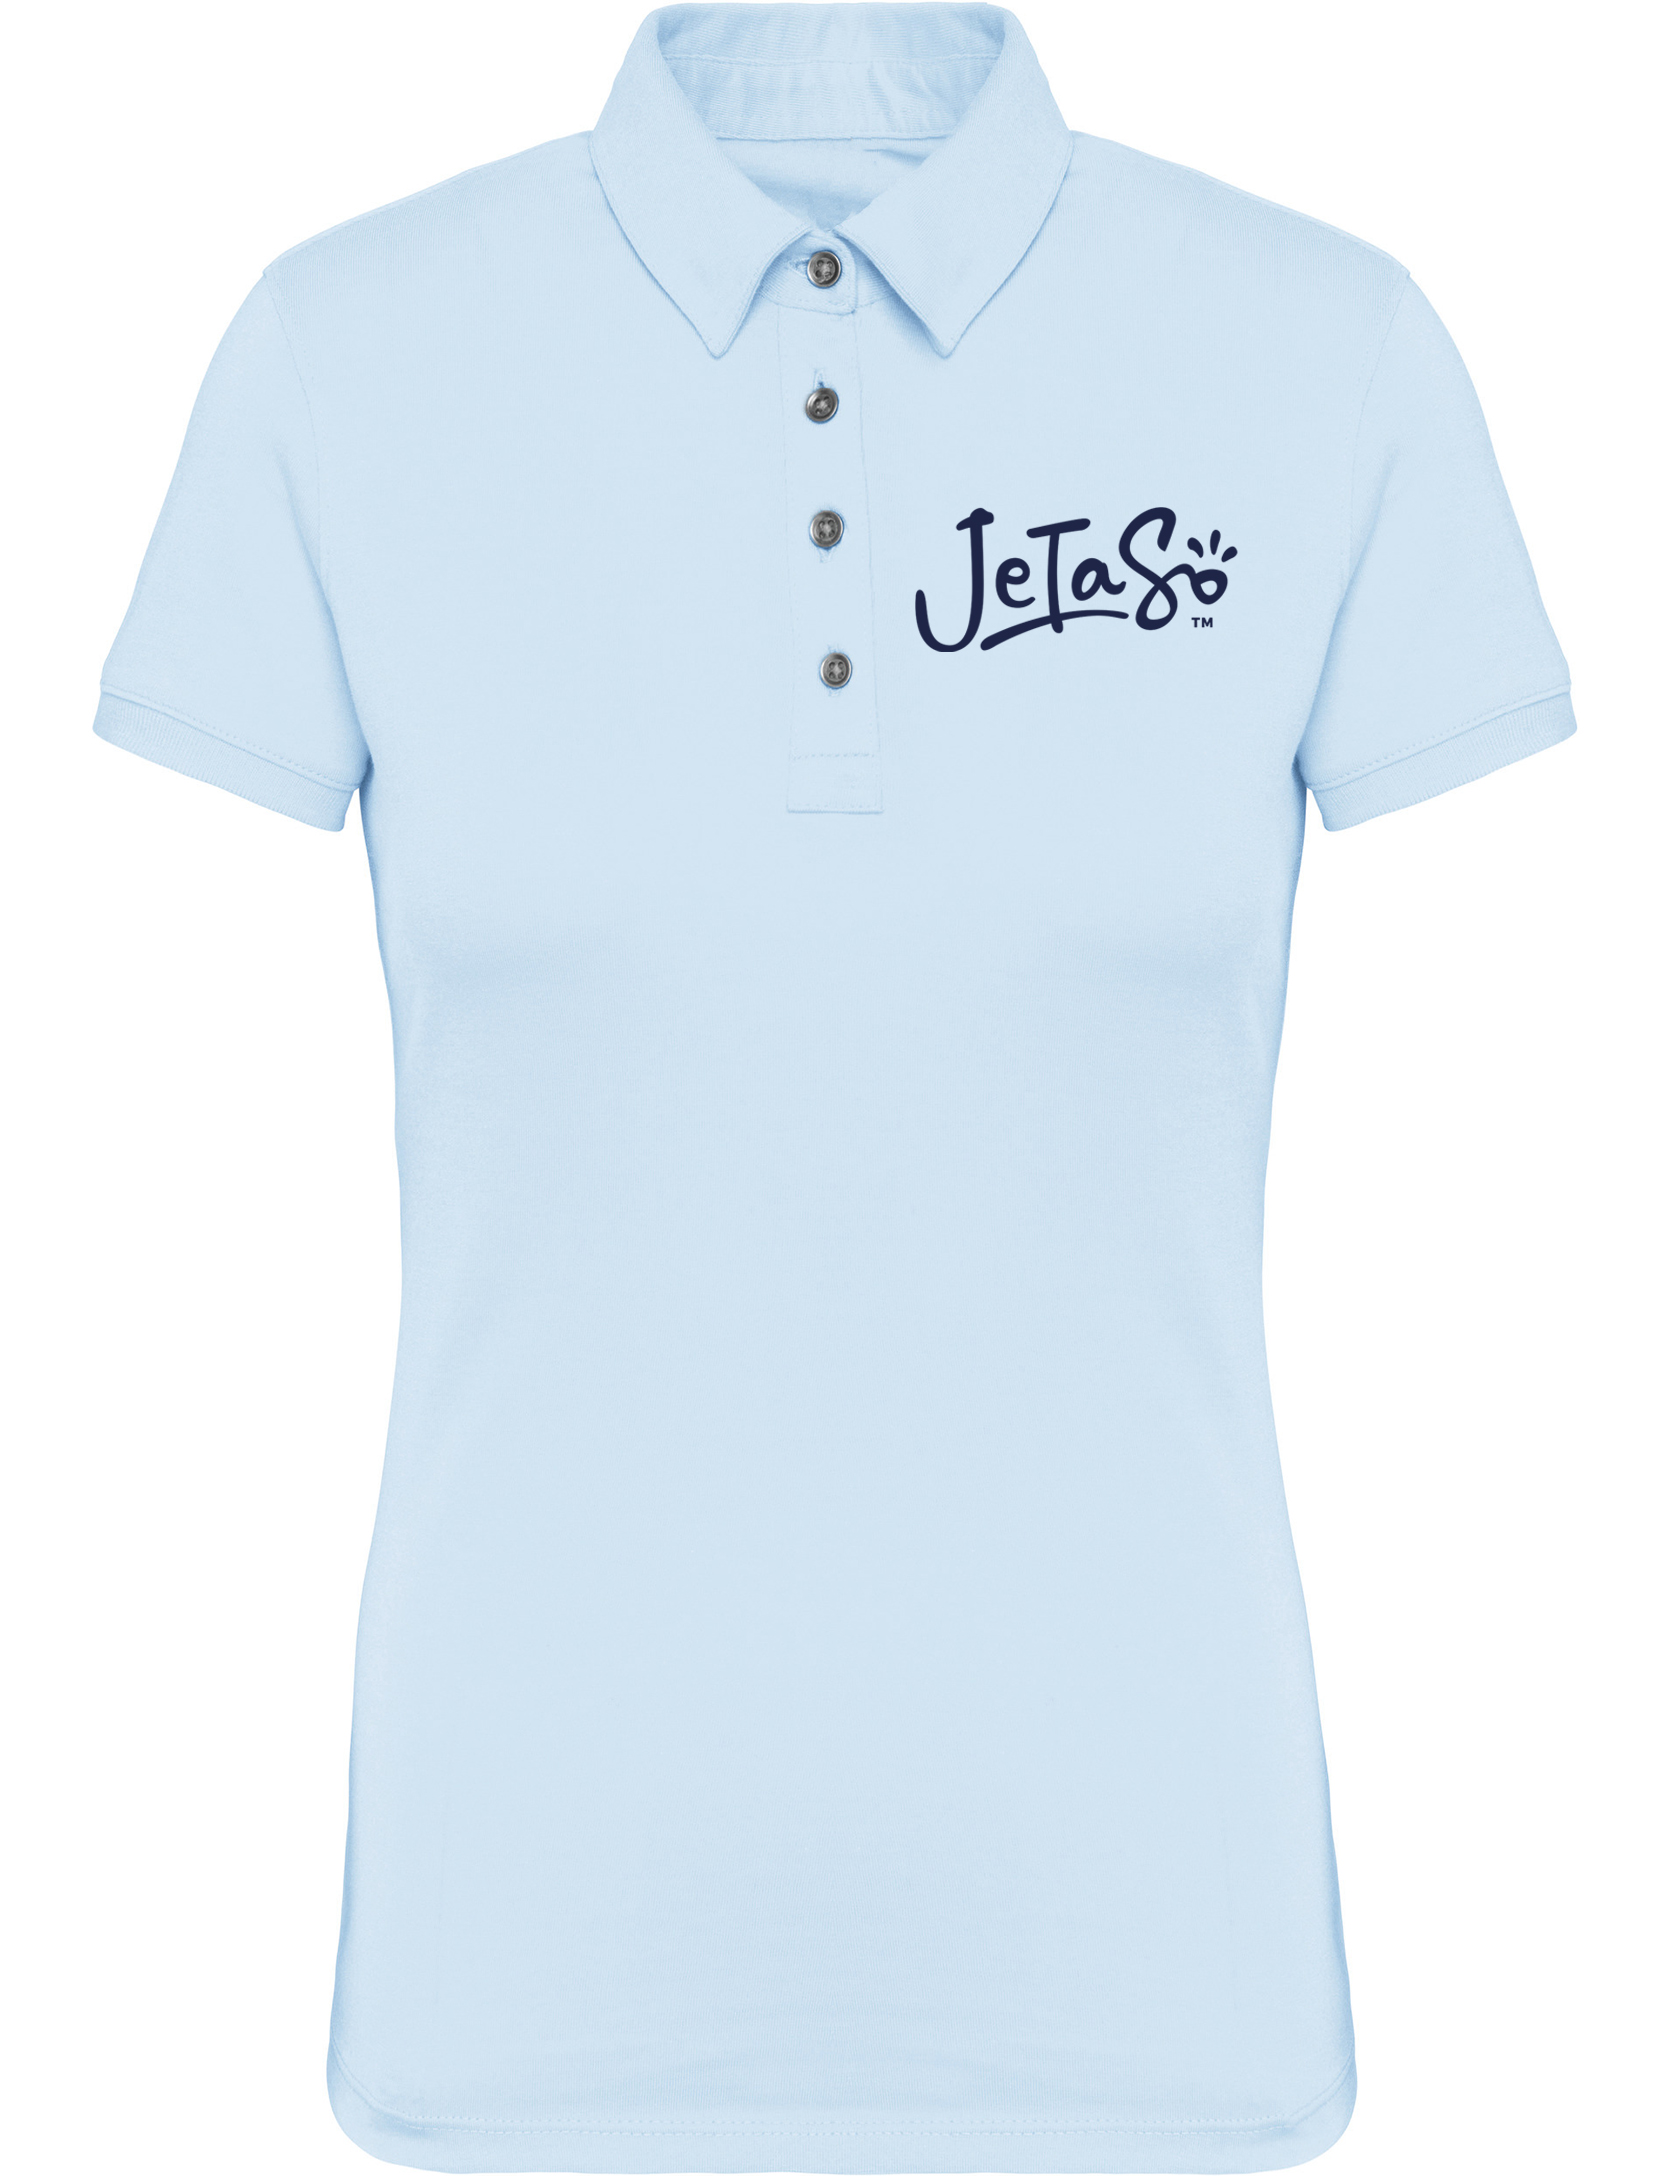 Jersey Polo shirt Ladies' short sleeved